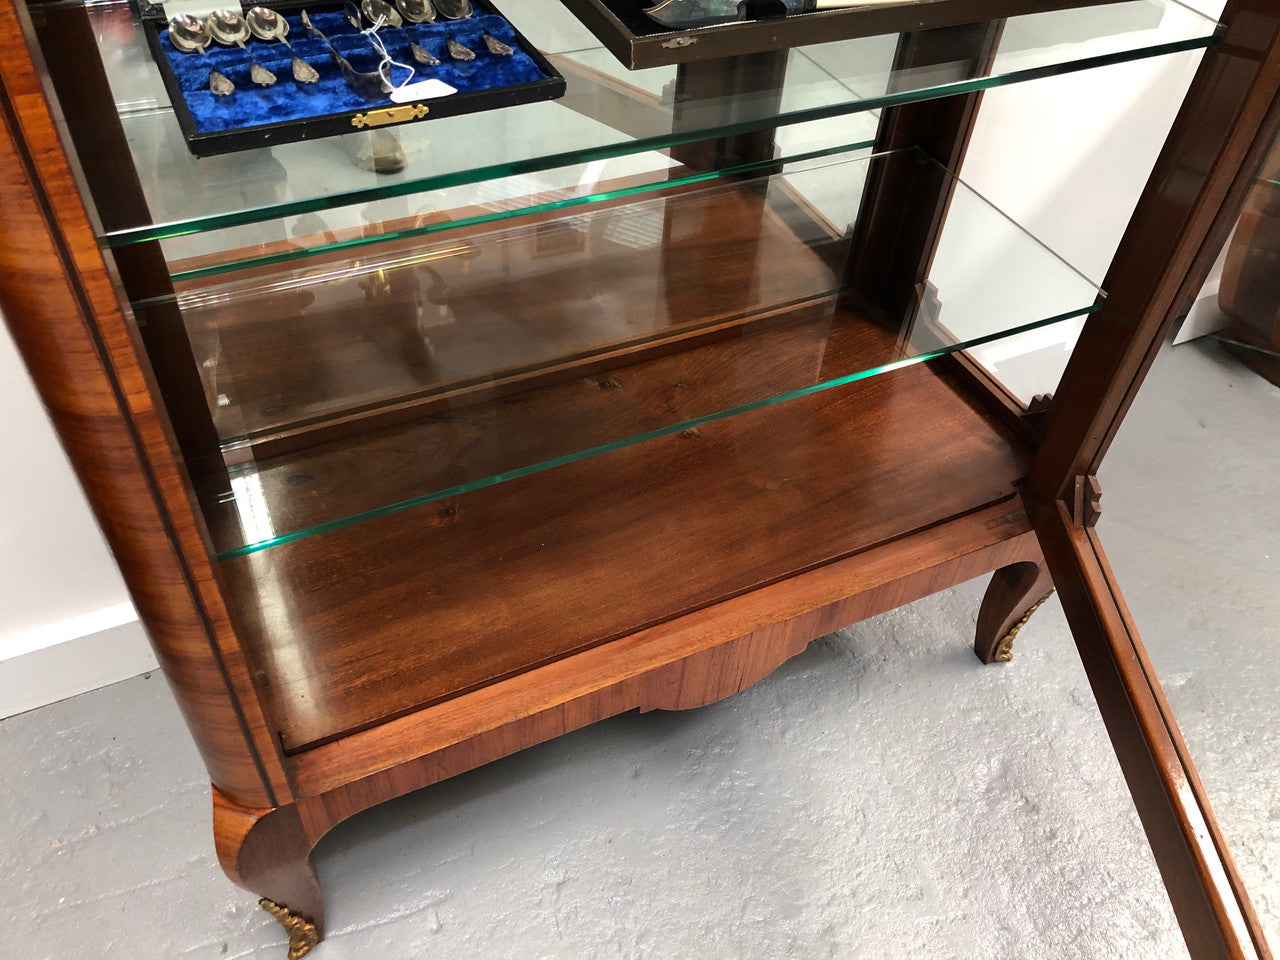 Beautiful French walnut and parquetry inlaid vitrine with lovely bevelled glass and a marble top. It comes with four glass shelves which are adjustable and it is in good original condition.